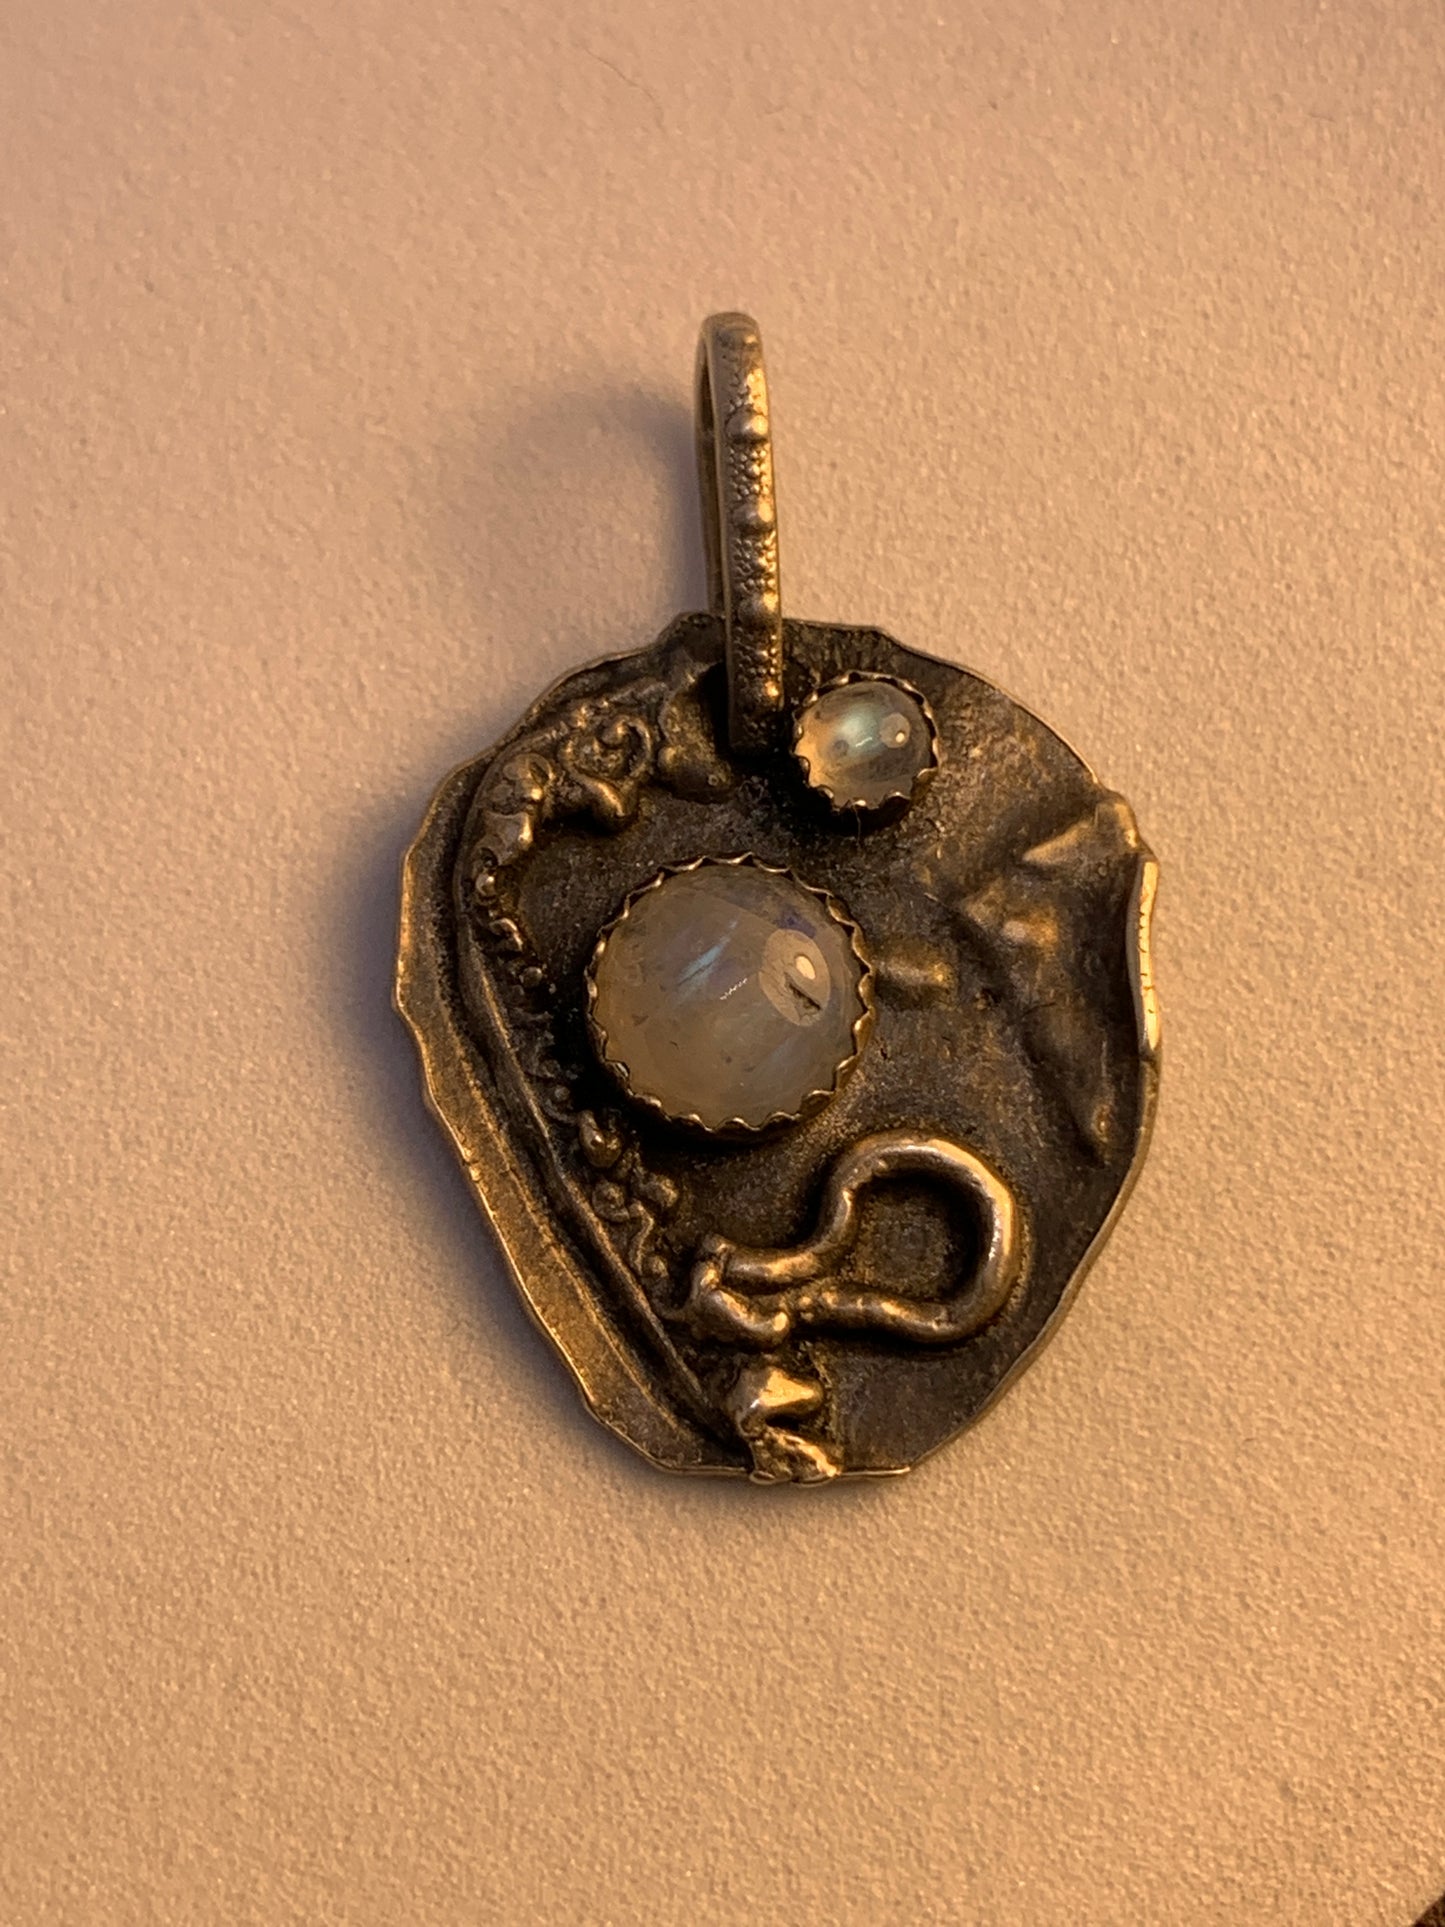 Unique Abstract Sterling Silver Pendant with Moonstone. This piece has been oxidized to bring out the texture. Every piece I make is unique and one of a kind. 